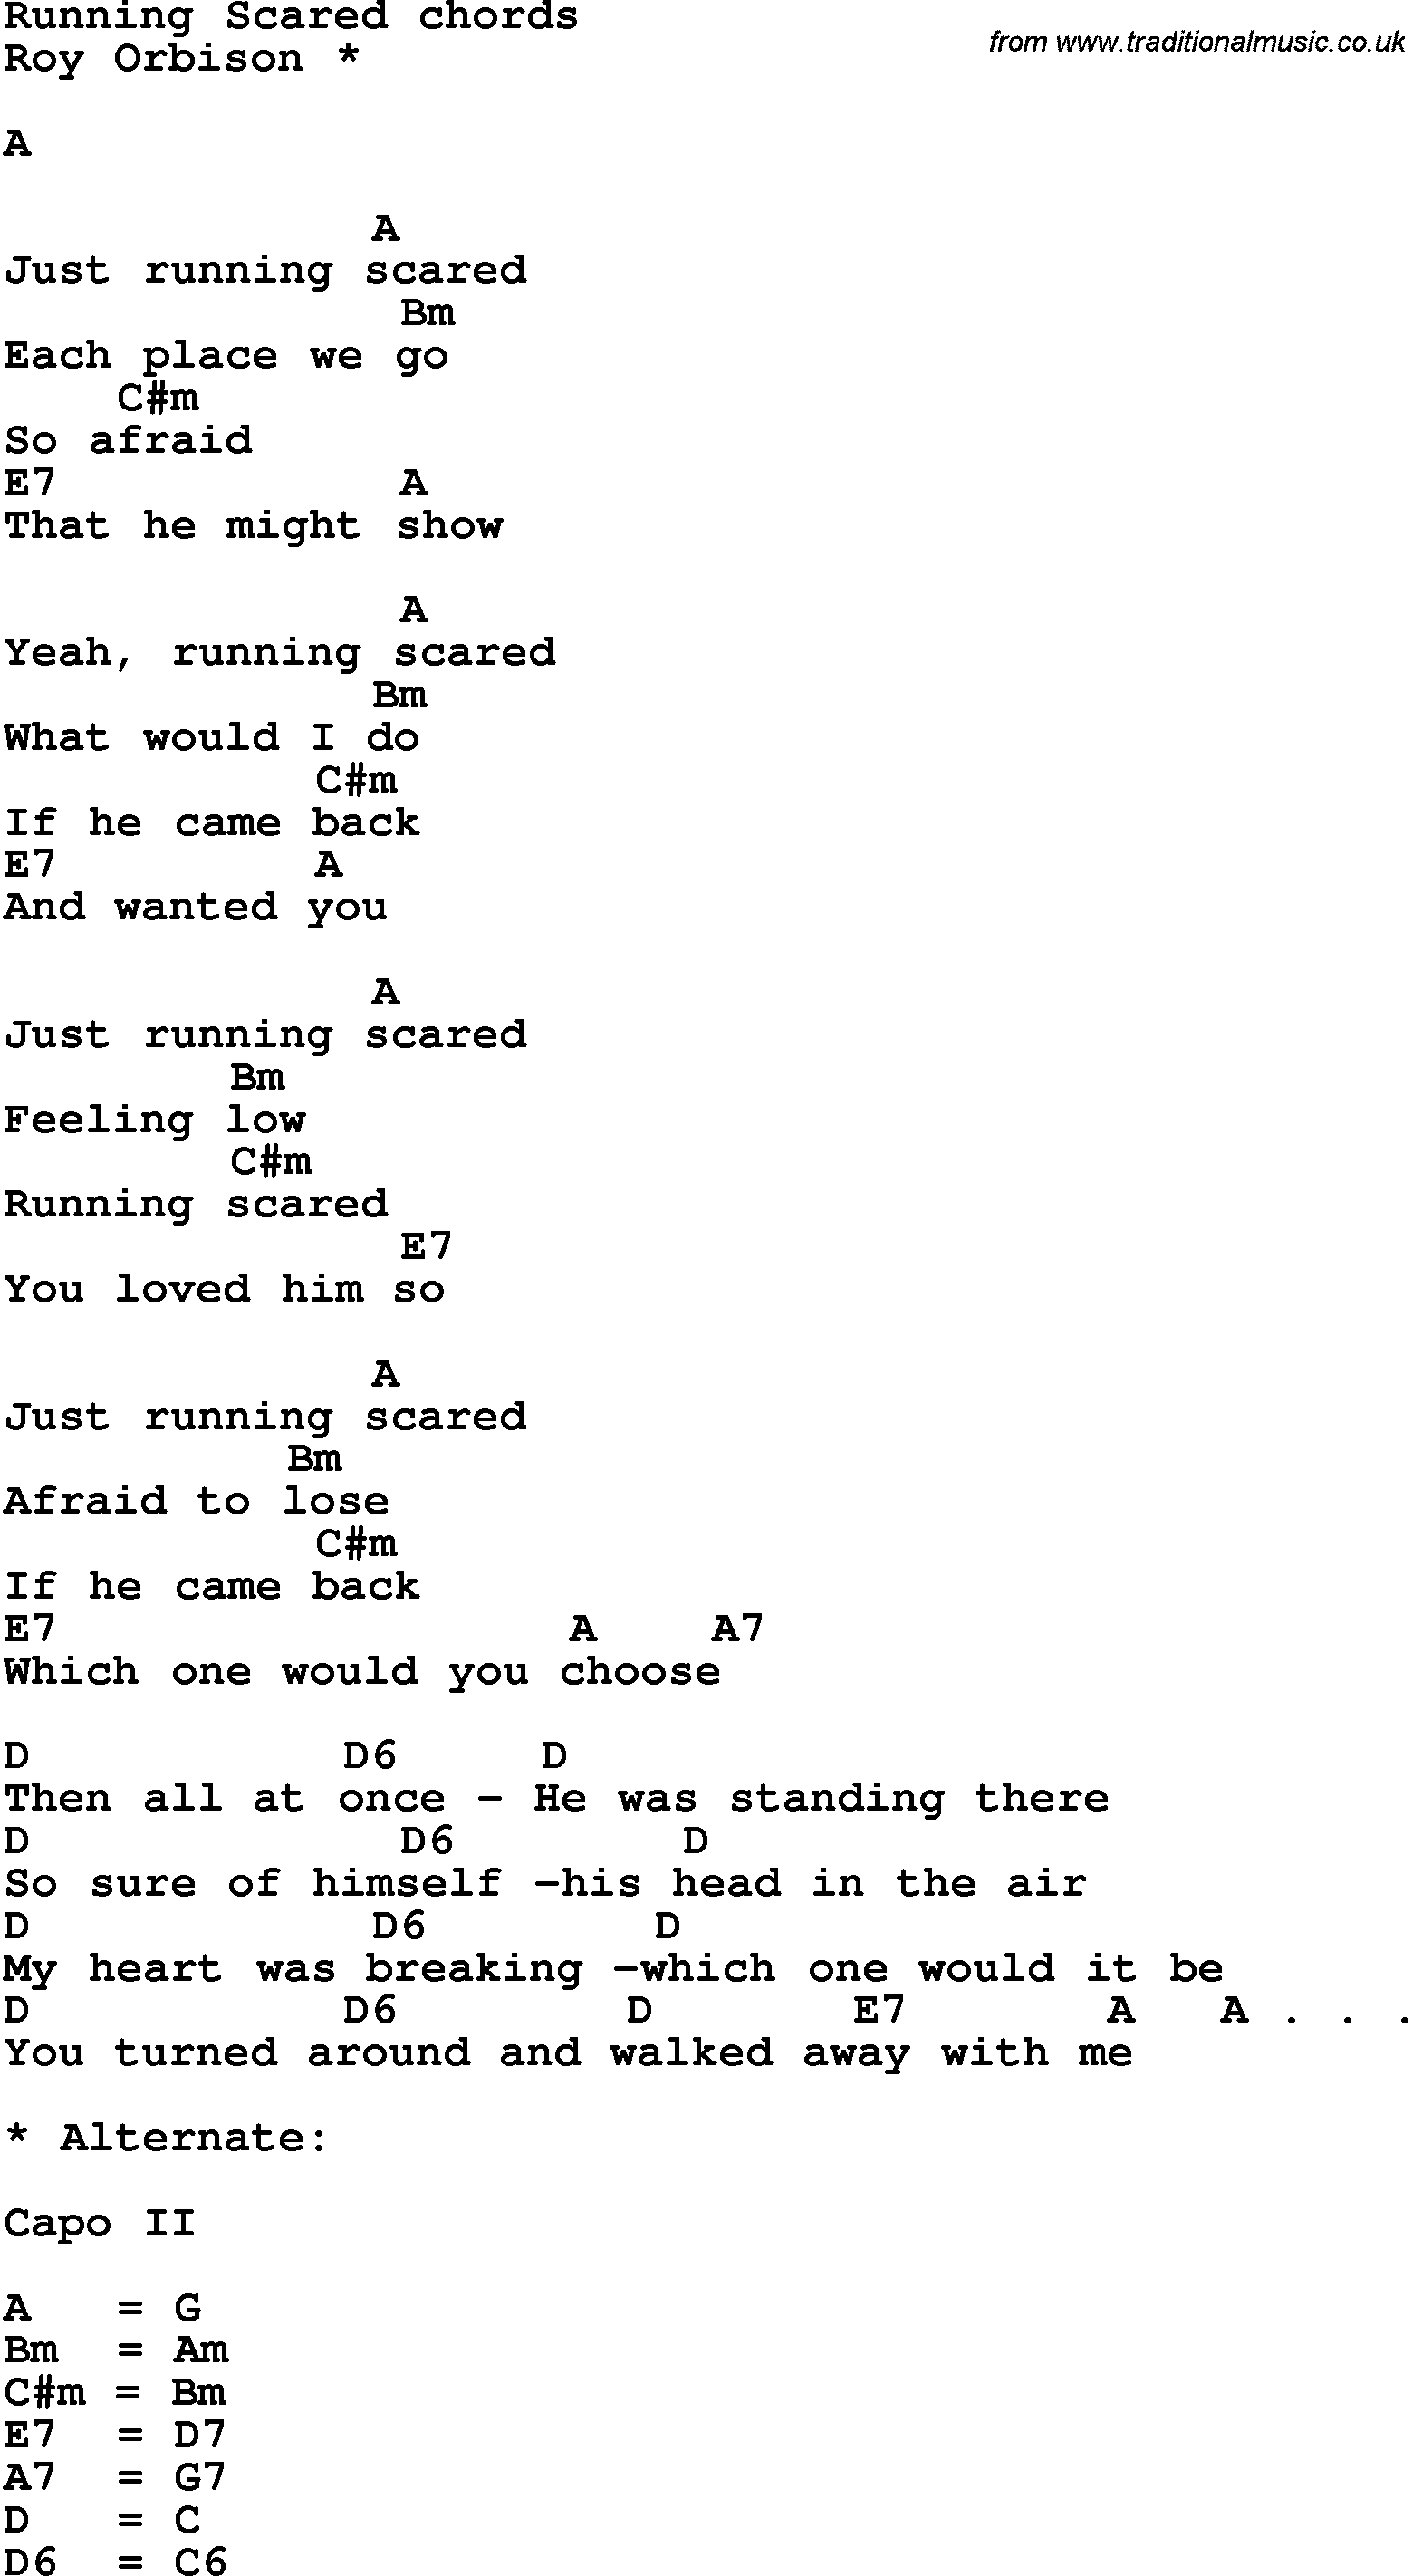 Song Lyrics with guitar chords for Running Scared